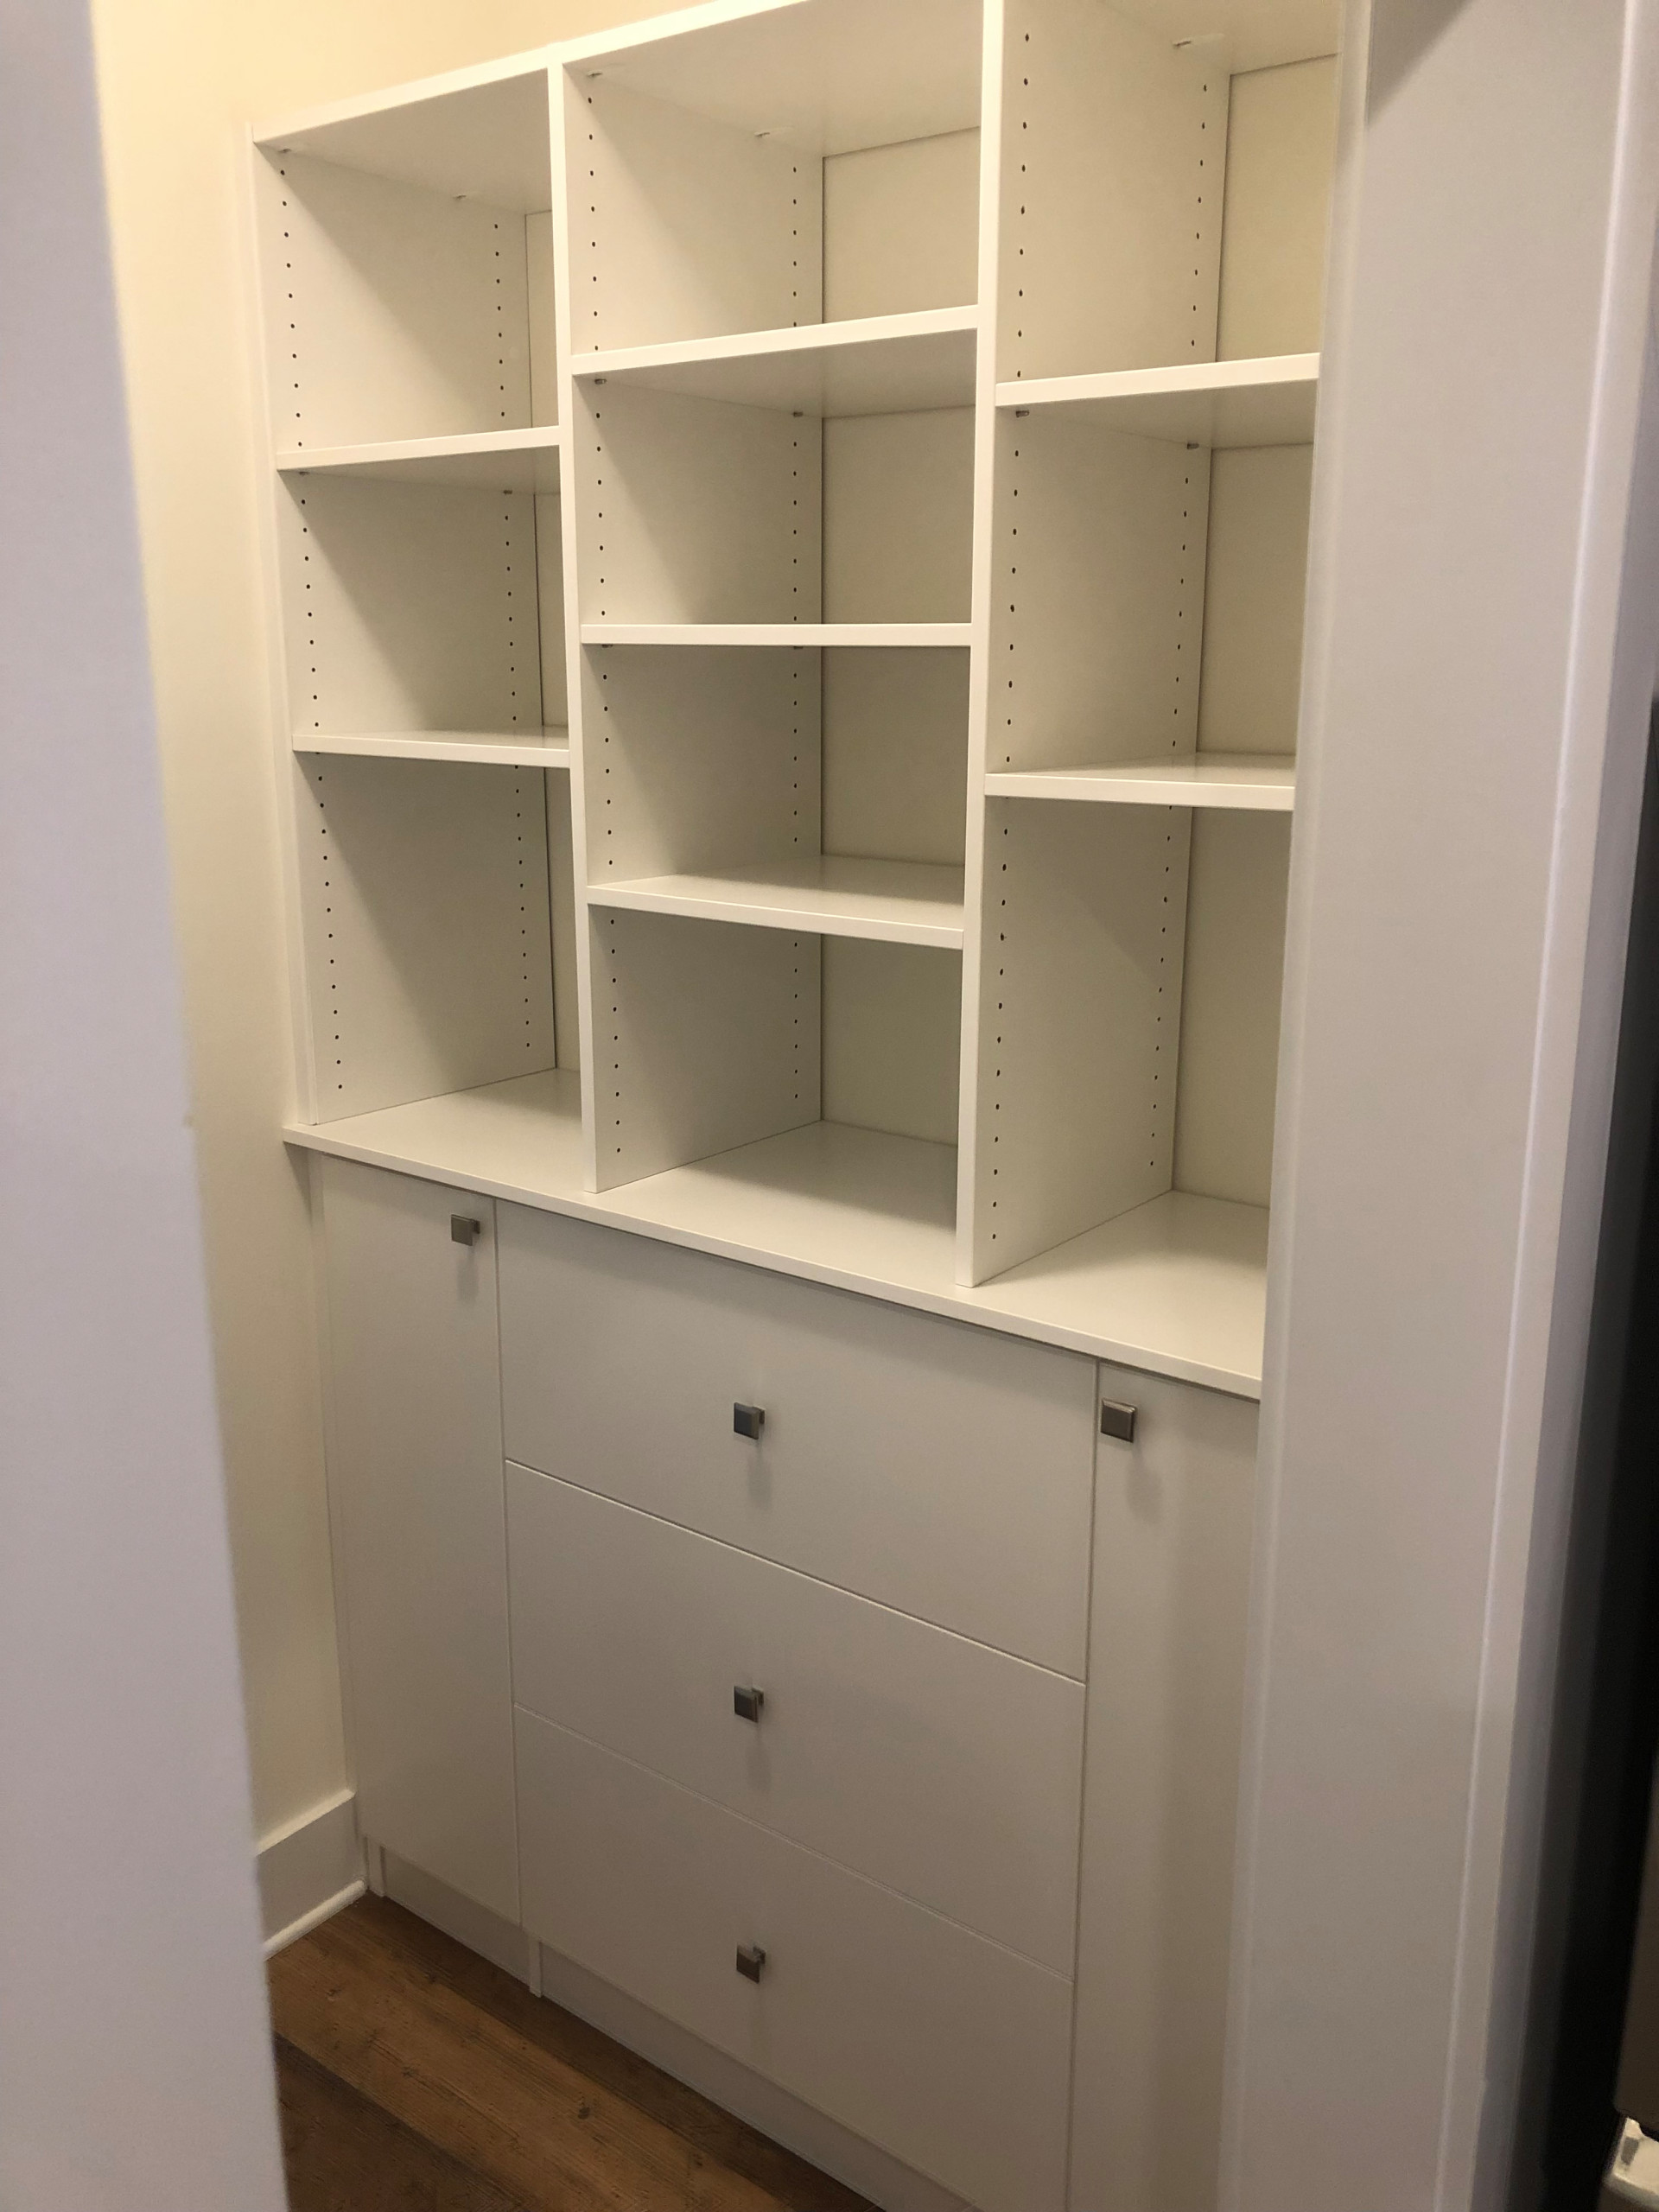 Dresser-like Built-in with Open Shelving Above